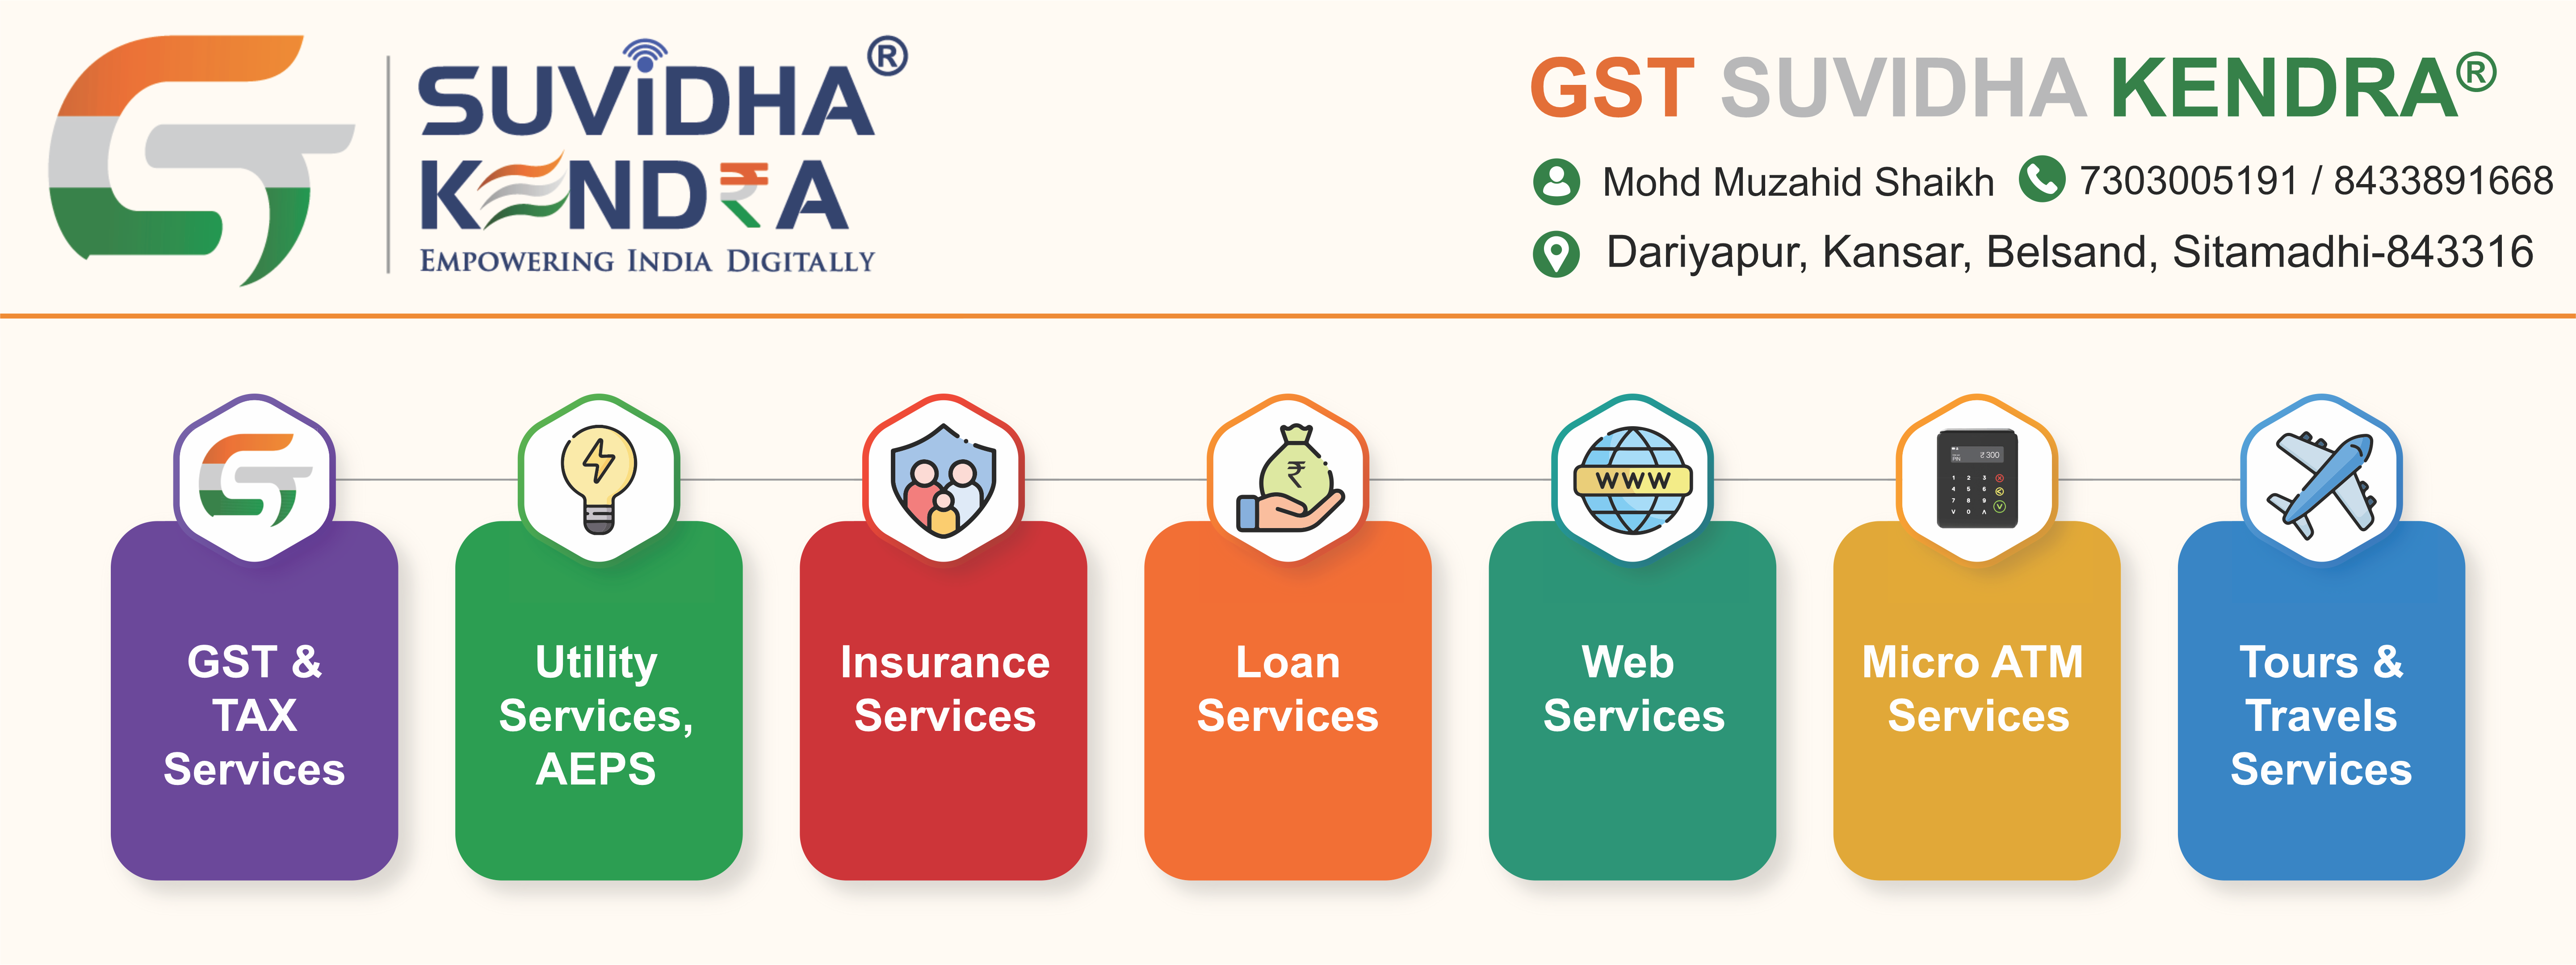 . Nature of Services: Level 1 Services 1. GST Registration 2. GST Certificate 3. GST Book-keeping 4. GST Reconciliation 5. GST Return Filing 6. GST Surrender 7. Opting GST Composition Scheme to Regular Scheme 8. Eway Bill Level 2 Services 1. PAN Card 2. DSC Class 3. DSC Token 4. Accounting 5. Trademark Registration 6. ITR (For Salaried Person) 7. ITR (Proprietor Business) 8. ITR ( Other Business)9. TDS Return Filing 10. CA Certification of ITR 11. Balance Sheet & Profit Loss Account 12. CMA Report 13. CA Certification of Balance Sheet 14. Tax Audit 15. Udyog Aadhar 16. Partnership Registration 17. Company Registration 18. LLP Formation 19. LUT File 20. Amendment or Correction in Any Application 21. IEC Registration Including Govt Fees 22. Proprietorship Registration Level 3 Services Travel 1. Flight ( Domestic/International) 2. Bus 3. Hotels ( Domestic/International) Recharge 1. Mobile 2. DTH 3. DATACard Bill Payment 1. Water Bill Payment 2. Mobile Bill Payment 3. Insurance Bill Payment 4. Gas Bill Payment 5. Electricity Bill Payment 6. DTH Bill Payment 7. Landline Bill Payment 8. Internet Bill Payment Money Transfer Send money to any one account using our Money Transfer system for your clients & Earn Commission. AEPS Aadhaar Enabled payment system is a bank led model which allows online inter-operable financial inclusion transaction at PoS (MicroATM) through the Business correspondent of any bank using the Aadhaar authentication allows you to do six types of transactions. The only inputs required for a customer to do a transaction under this scenario are:- 1. IIN (Identifying the Bank to which the customer is associated) 2. Aadhaar Number3. Fingerprint captured during their enrollment It works as Mini ATM and you can give cash to your clients and earn attractive commissions. Insurance 1. Car Insurance 2. Two Wheeler Insurance 3. Health Insurance 4. Group Term Insurance Loan 1. Home Loan 2. Business Loan 3. Personal Loan 4. Vehicle loan Micro ATM 4. Level Services 1. Banking on Demand